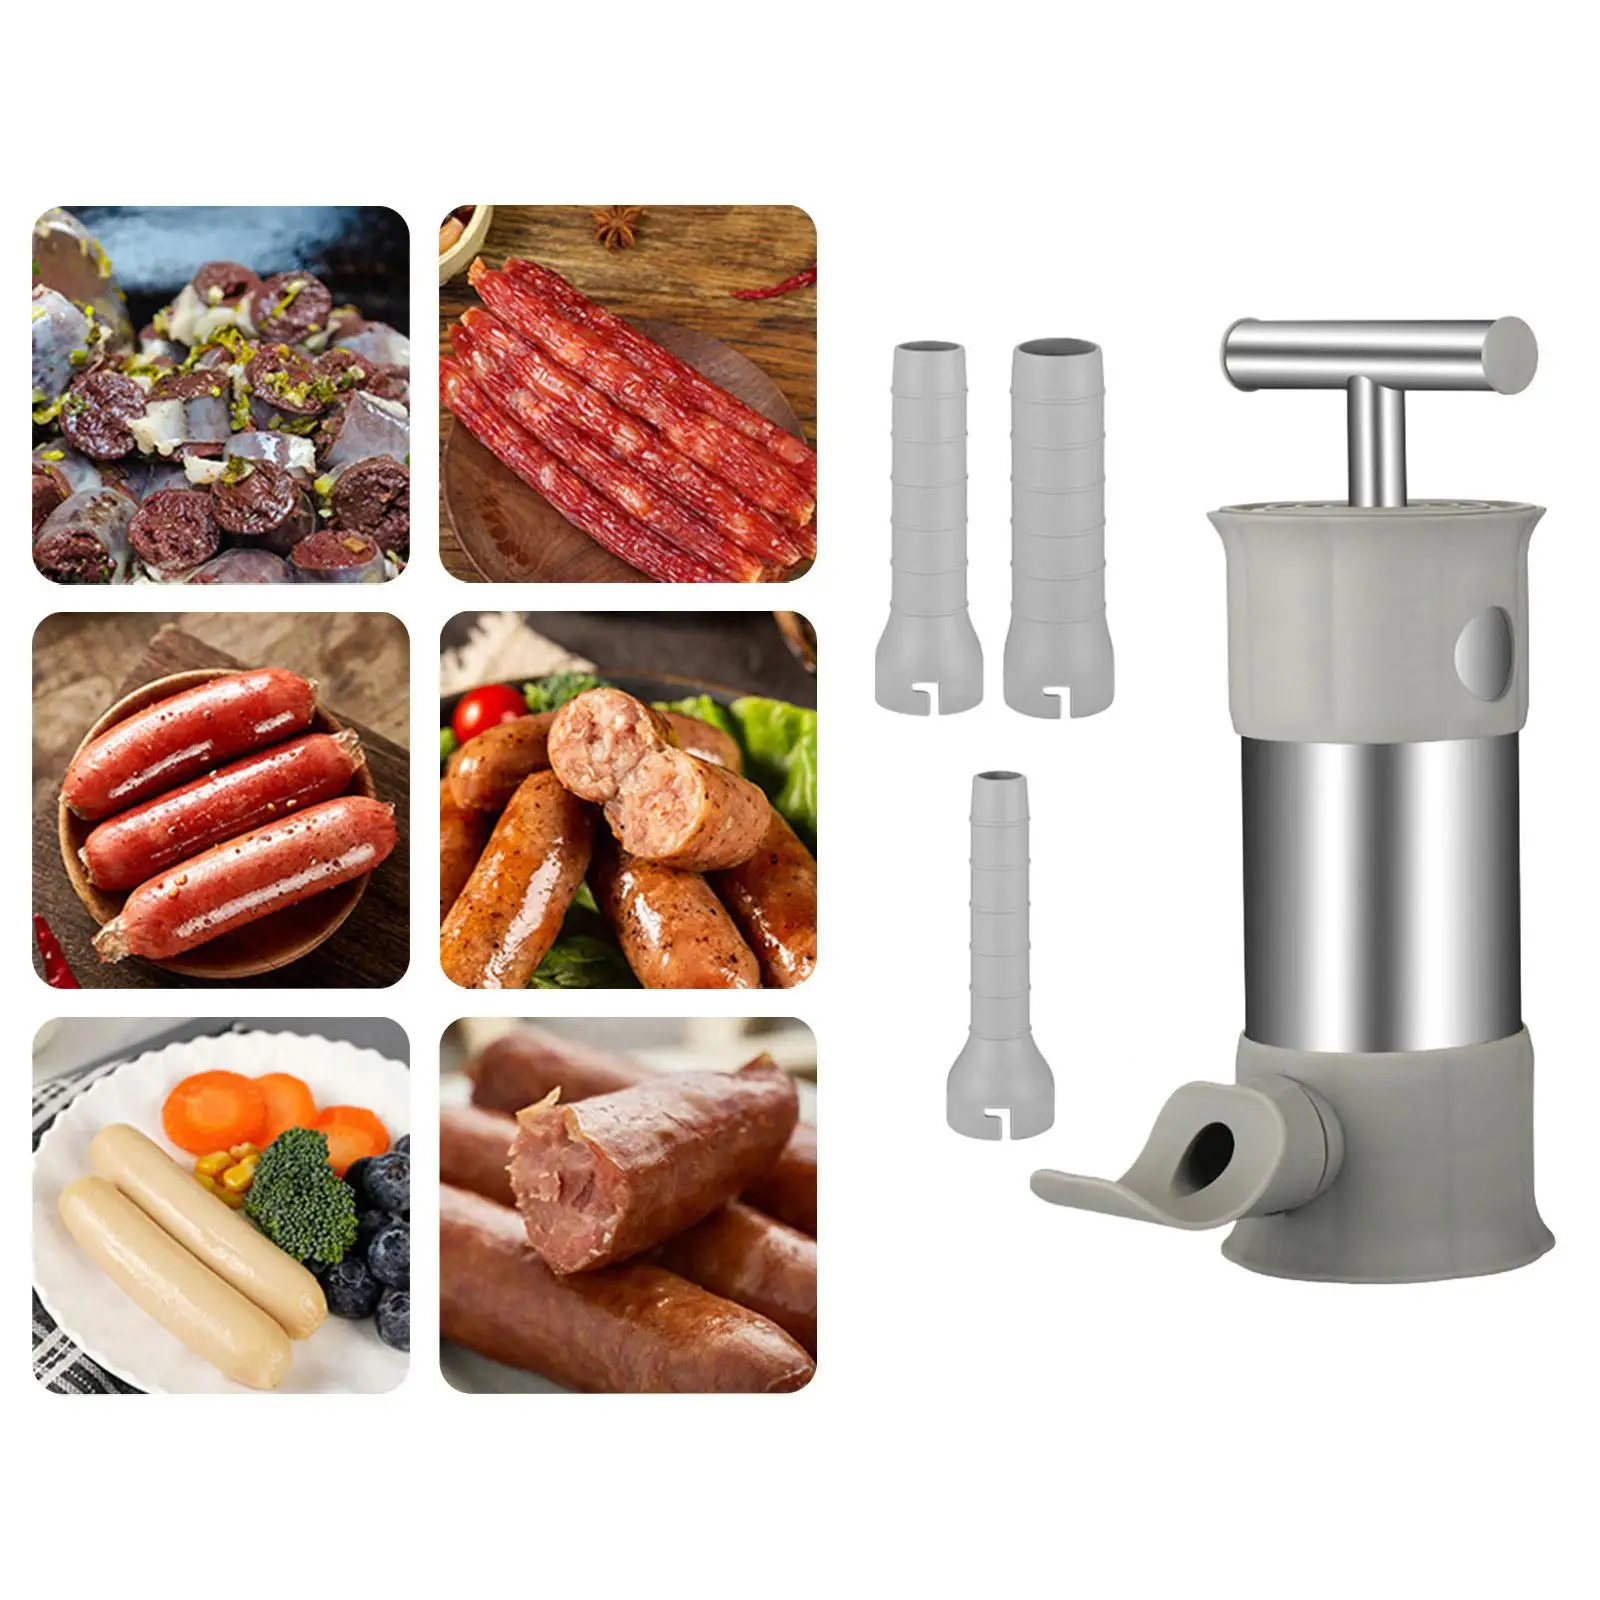 Sausage Stuffer Manual with 4 Nozzle Attachments for Home Gadgets Stuffing Tubes Stainless Steel Meat Sausage Machine